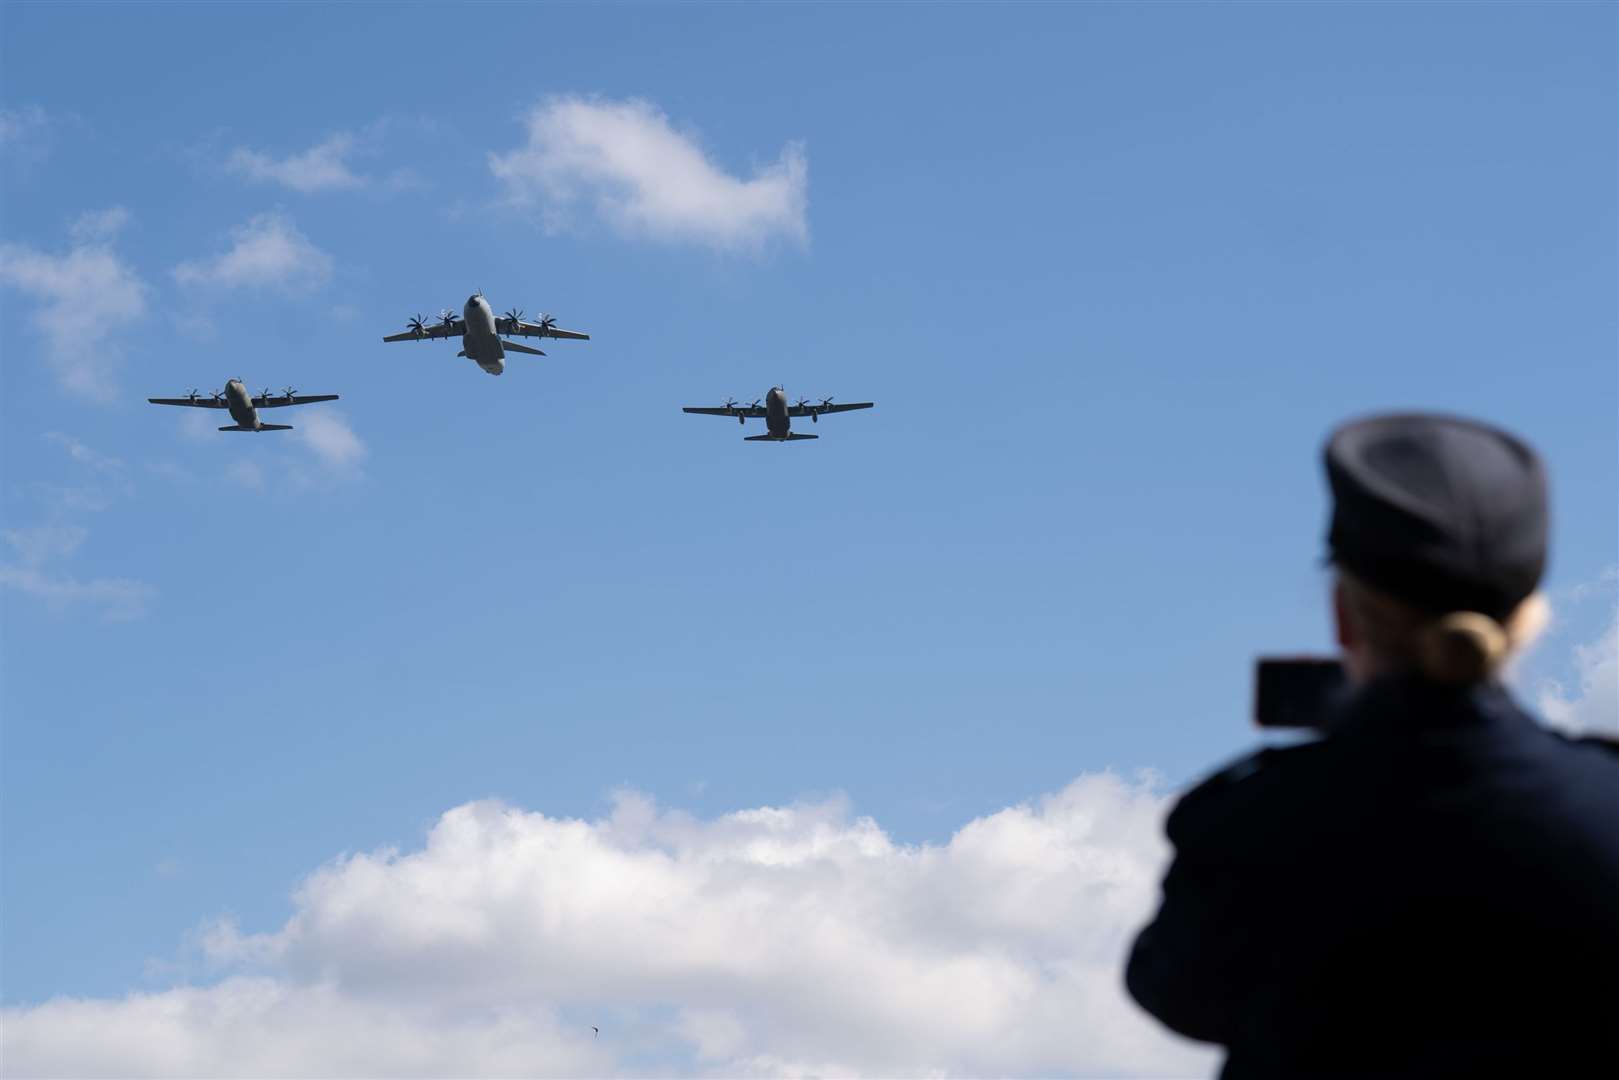 A C-130J Hercules and A400M Atlas take part in the rehearsal (Joe Giddens/PA)